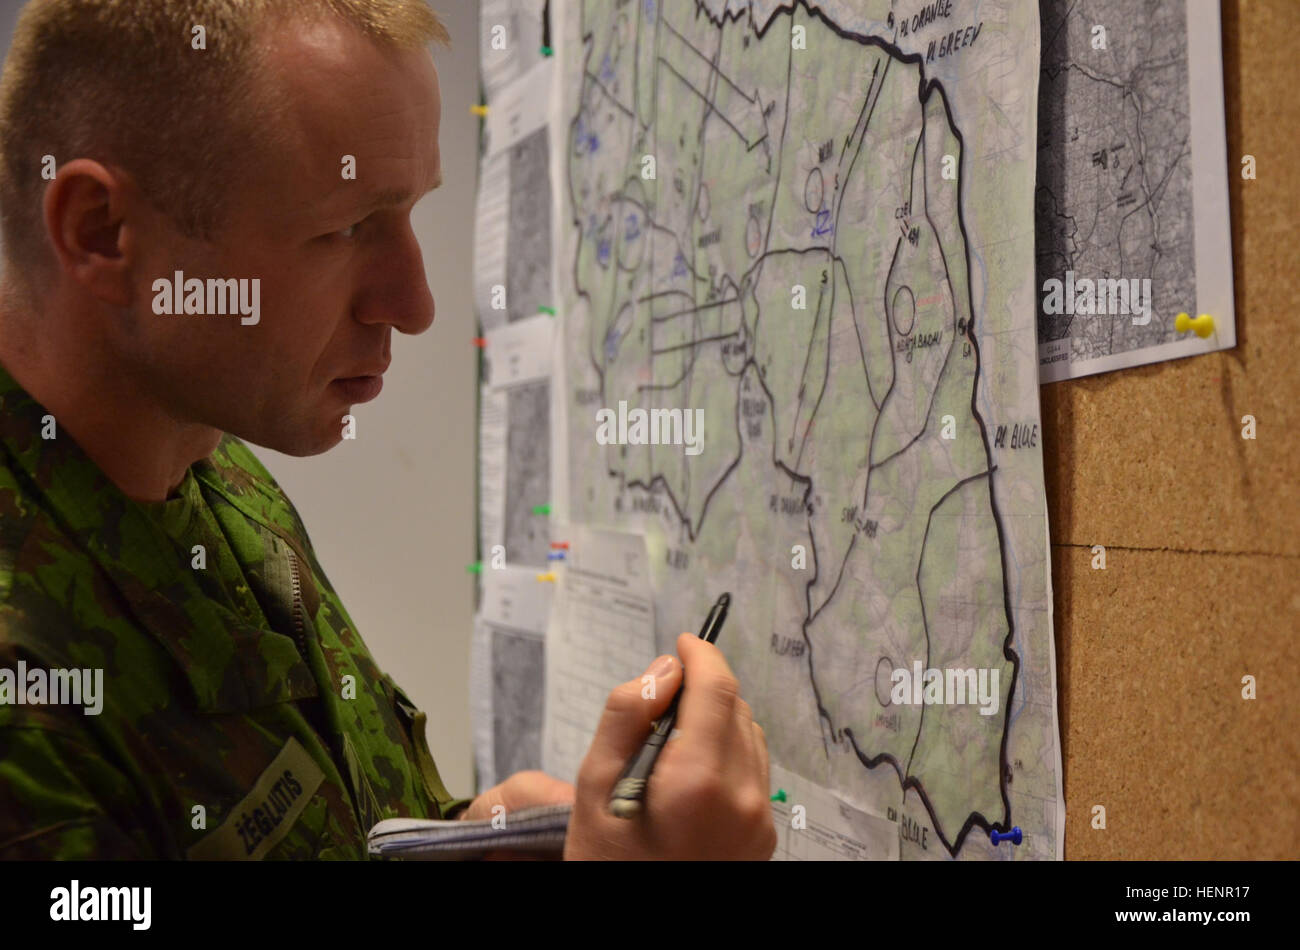 Lithuanian Land Force Staff Sgt. Albiwas Zeglaitis of 'Iron Wolf' Mechanized Infantry Brigade outline locations for training on a map during training exercise Saber Junction 2014 at the Joint Multinational Readiness Center in Hohenfels, Germany, Aug. 29, 2014. Saber Junction 2014 prepares U.S., NATO allies, and European security partners to conduct unified land operations through the simultaneous combination of offensive, defensive, and stability operations appropriate to the mission and the environment.  More information about Saber Junction 2014 can be found at http://www.eur.army.mil/SaberJ Stock Photo